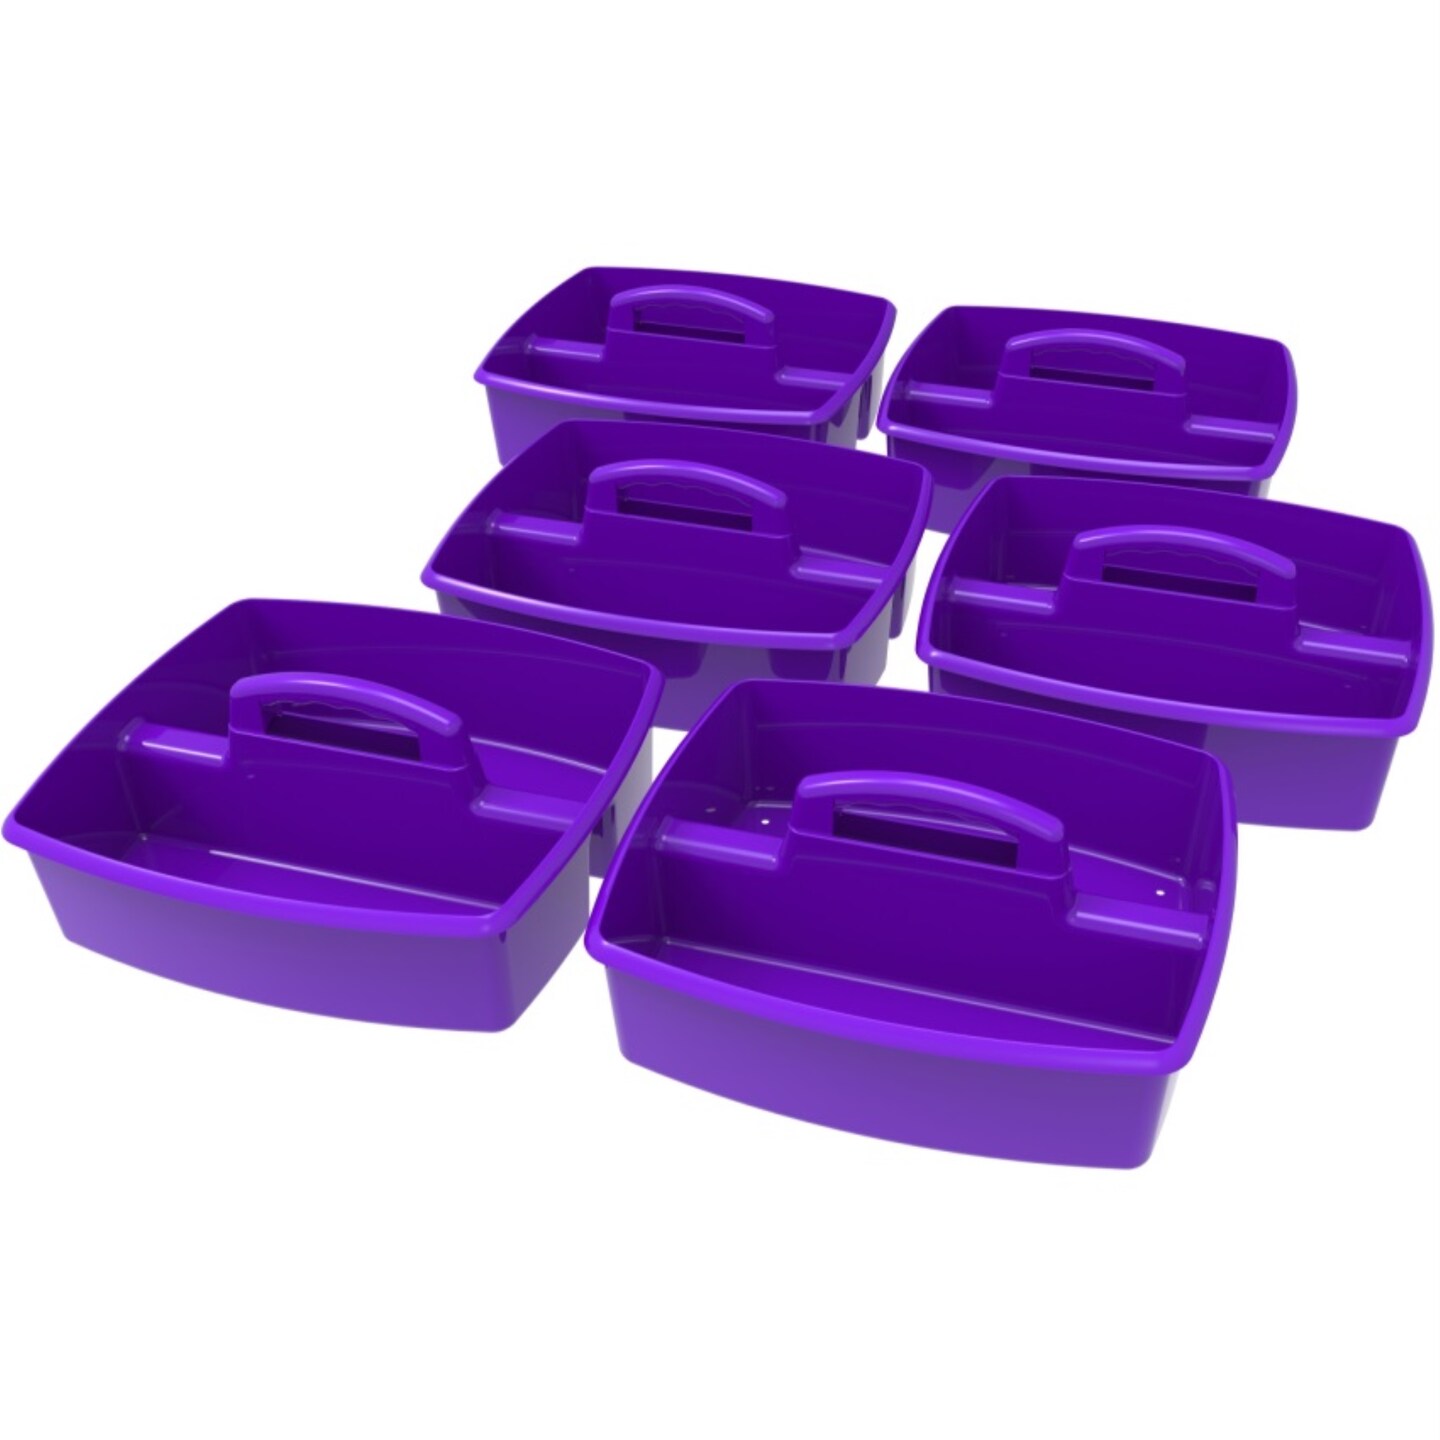 Large Caddy, Purple (Case of 6)